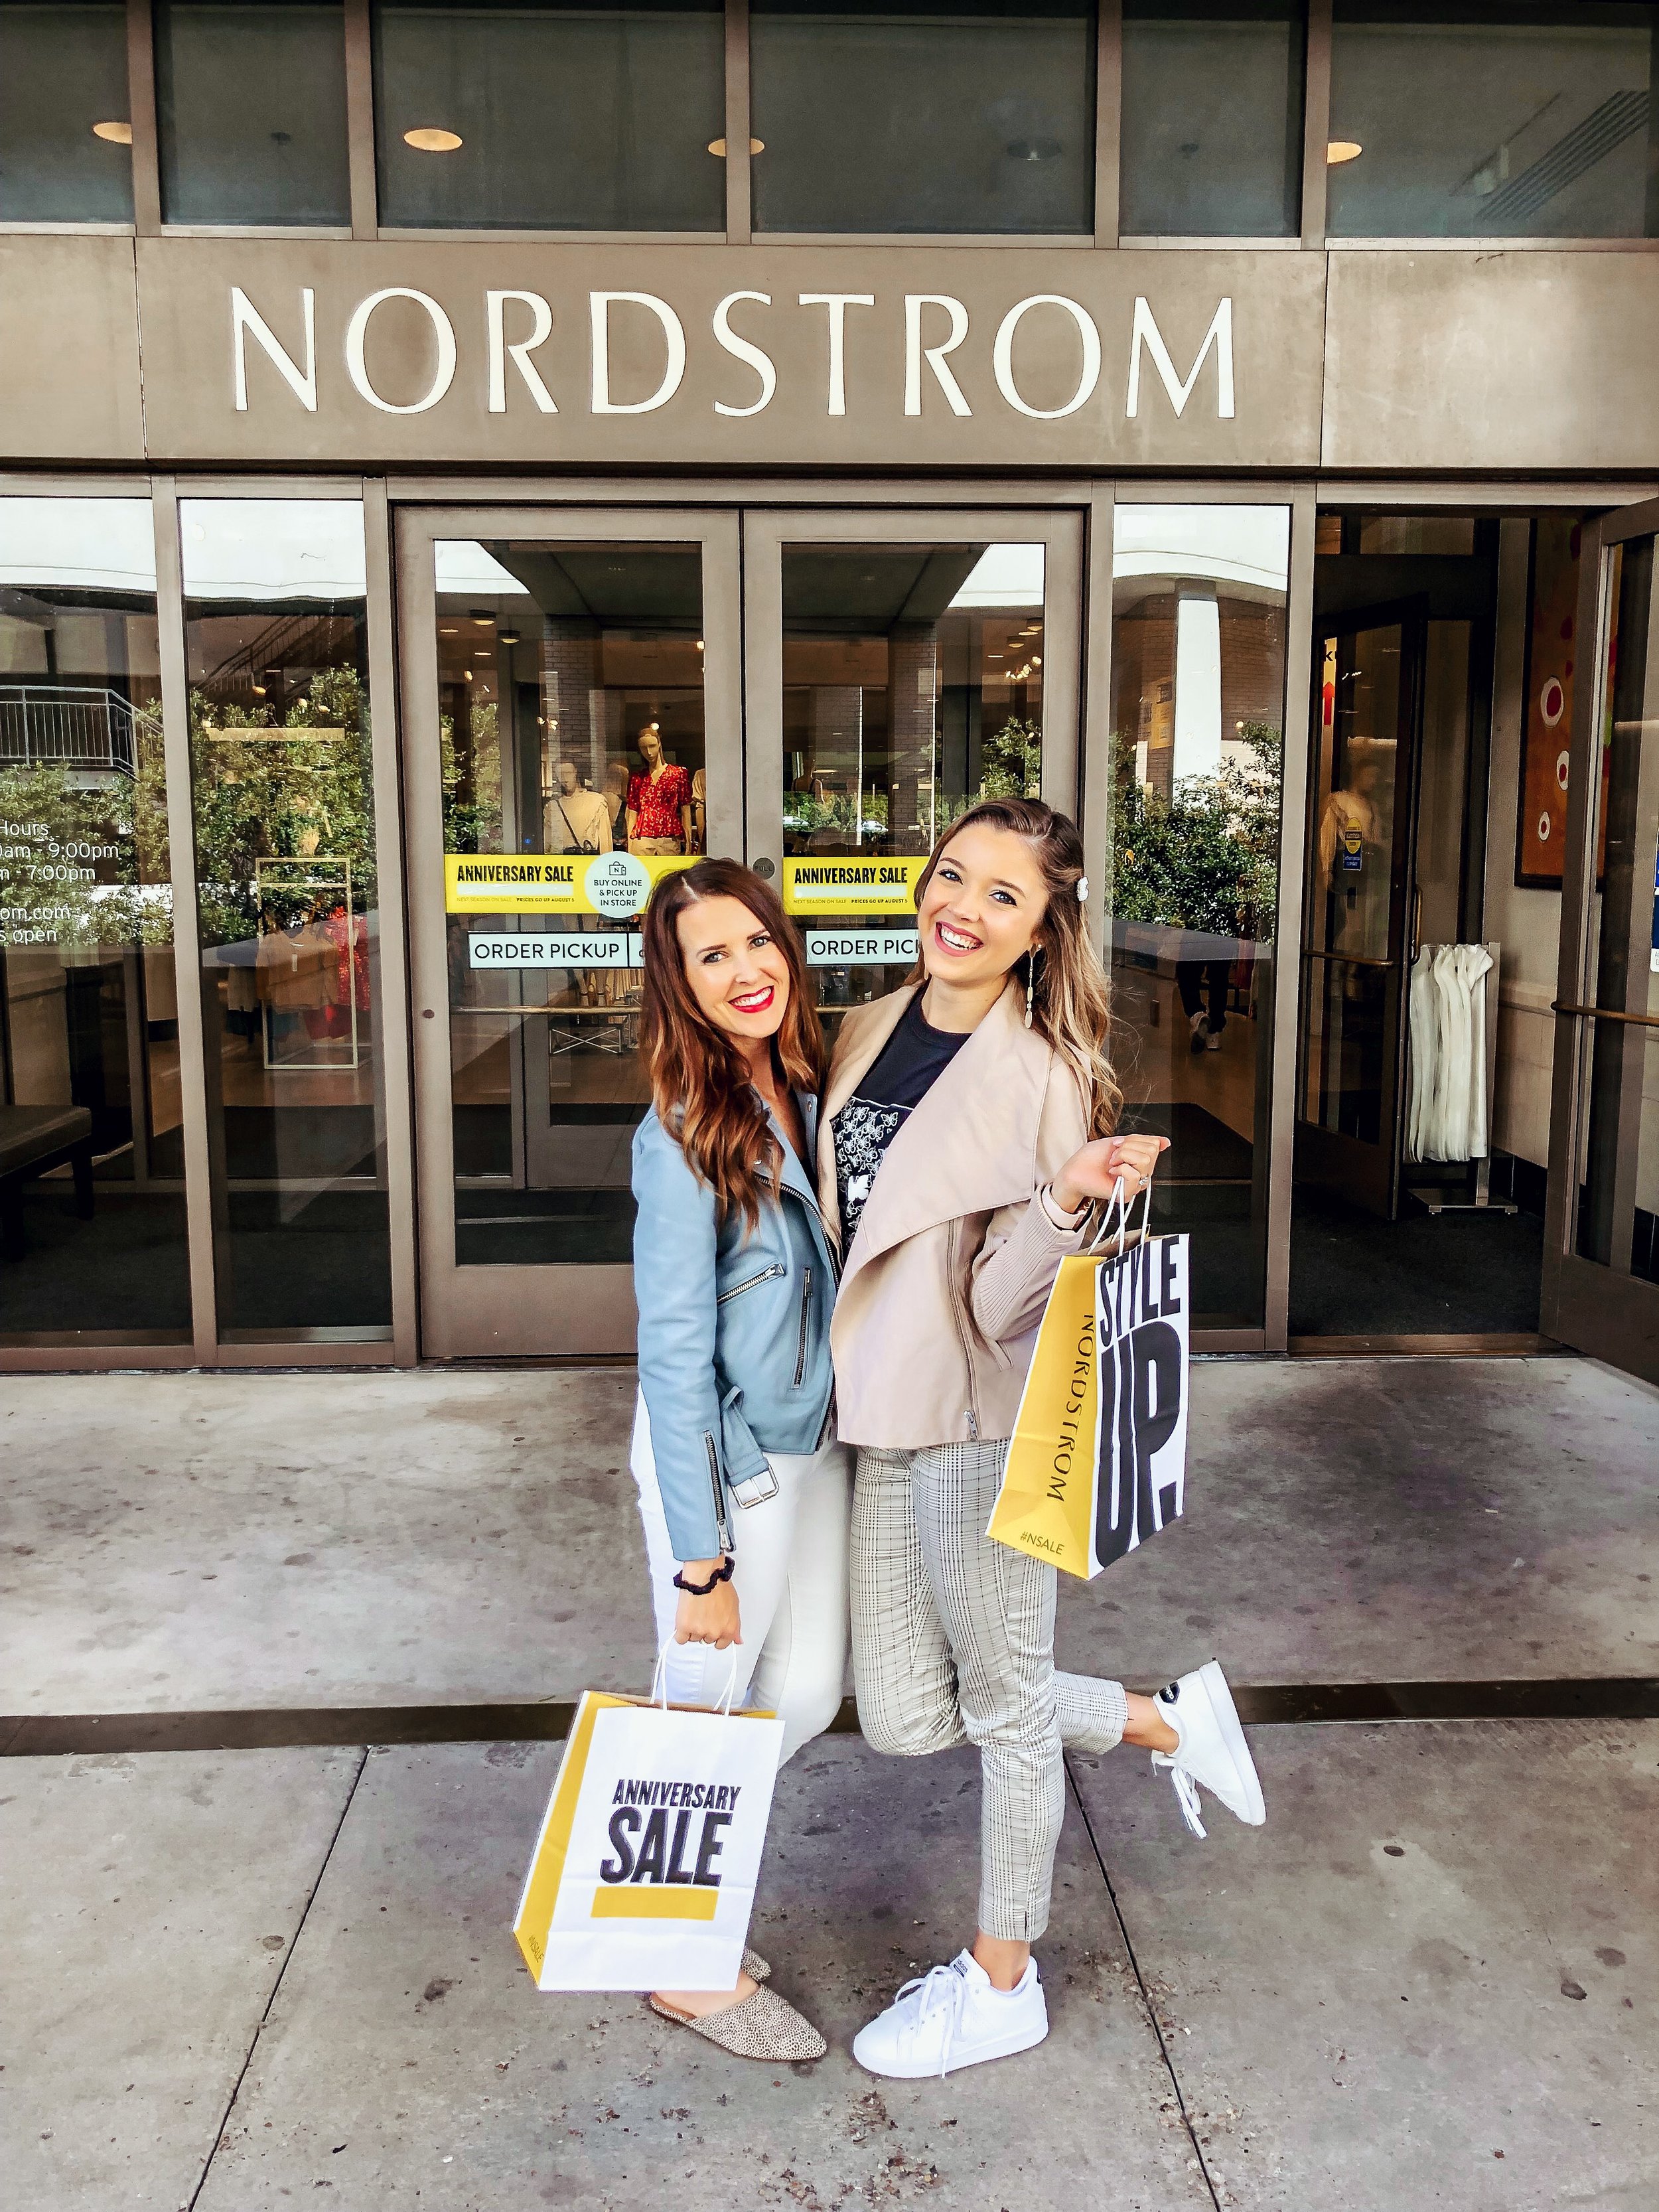 Nordstrom Sale Outfits, Still in Stock